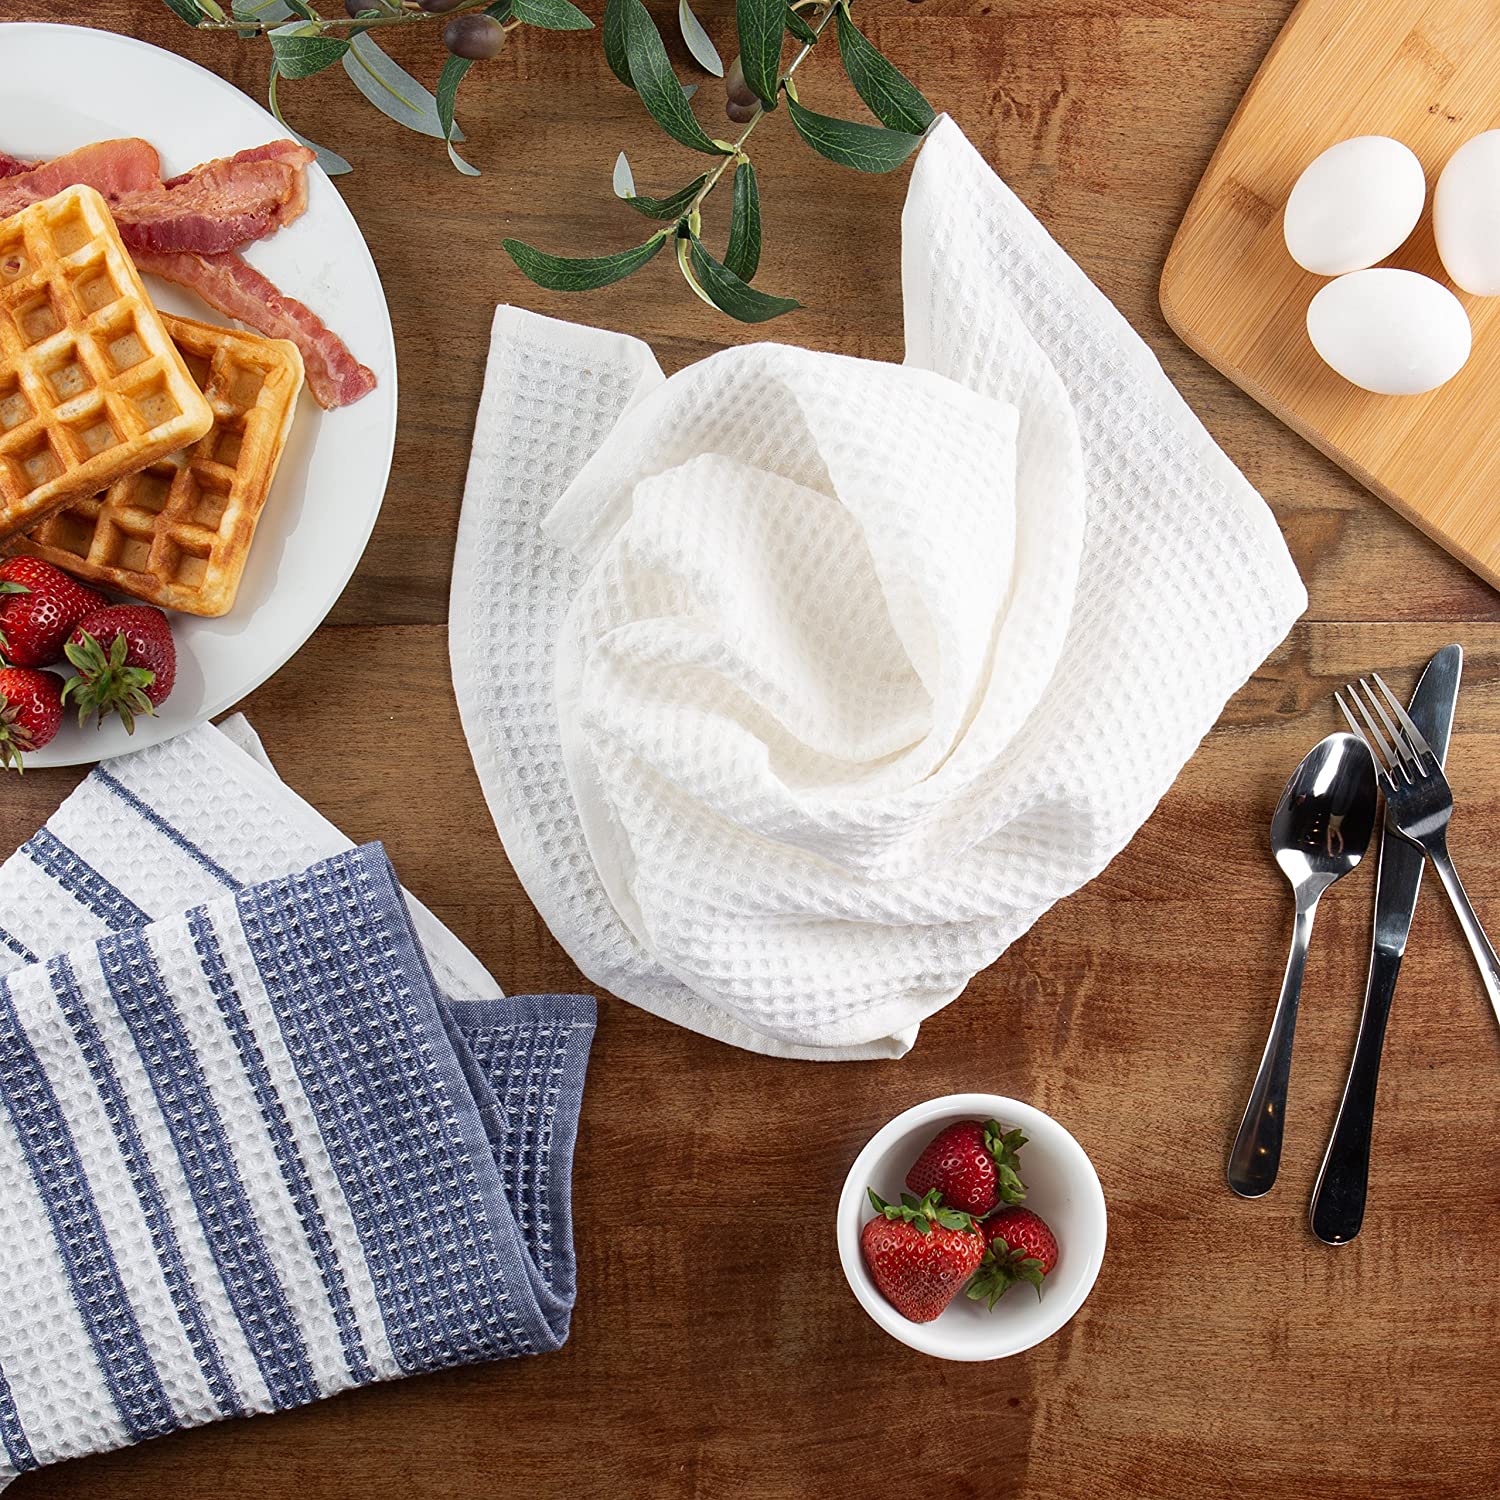 Sticky Toffee Cotton Waffle Weave Kitchen Towels, Gray, 3 Pack, 28 in x 16 in